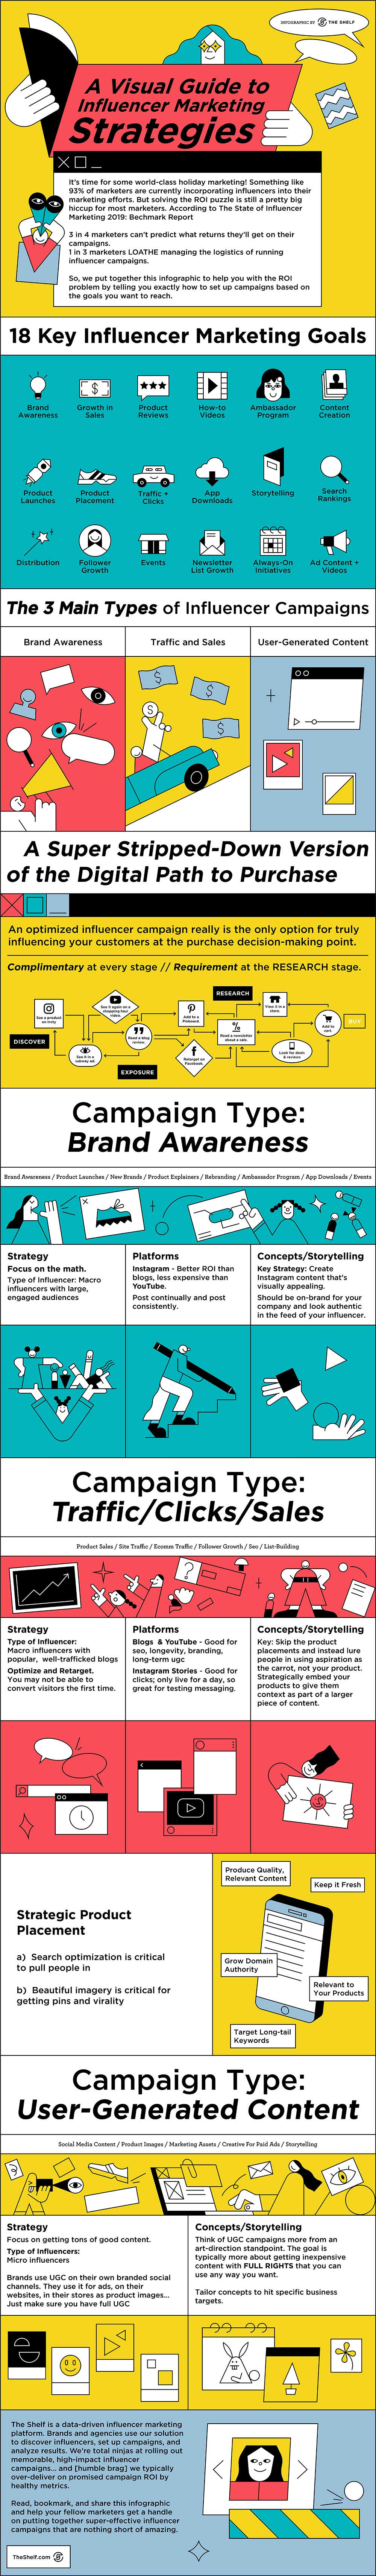  A Visual Guide to Influencer Marketing Strategies INFOGRAPHIC EMBED CODE